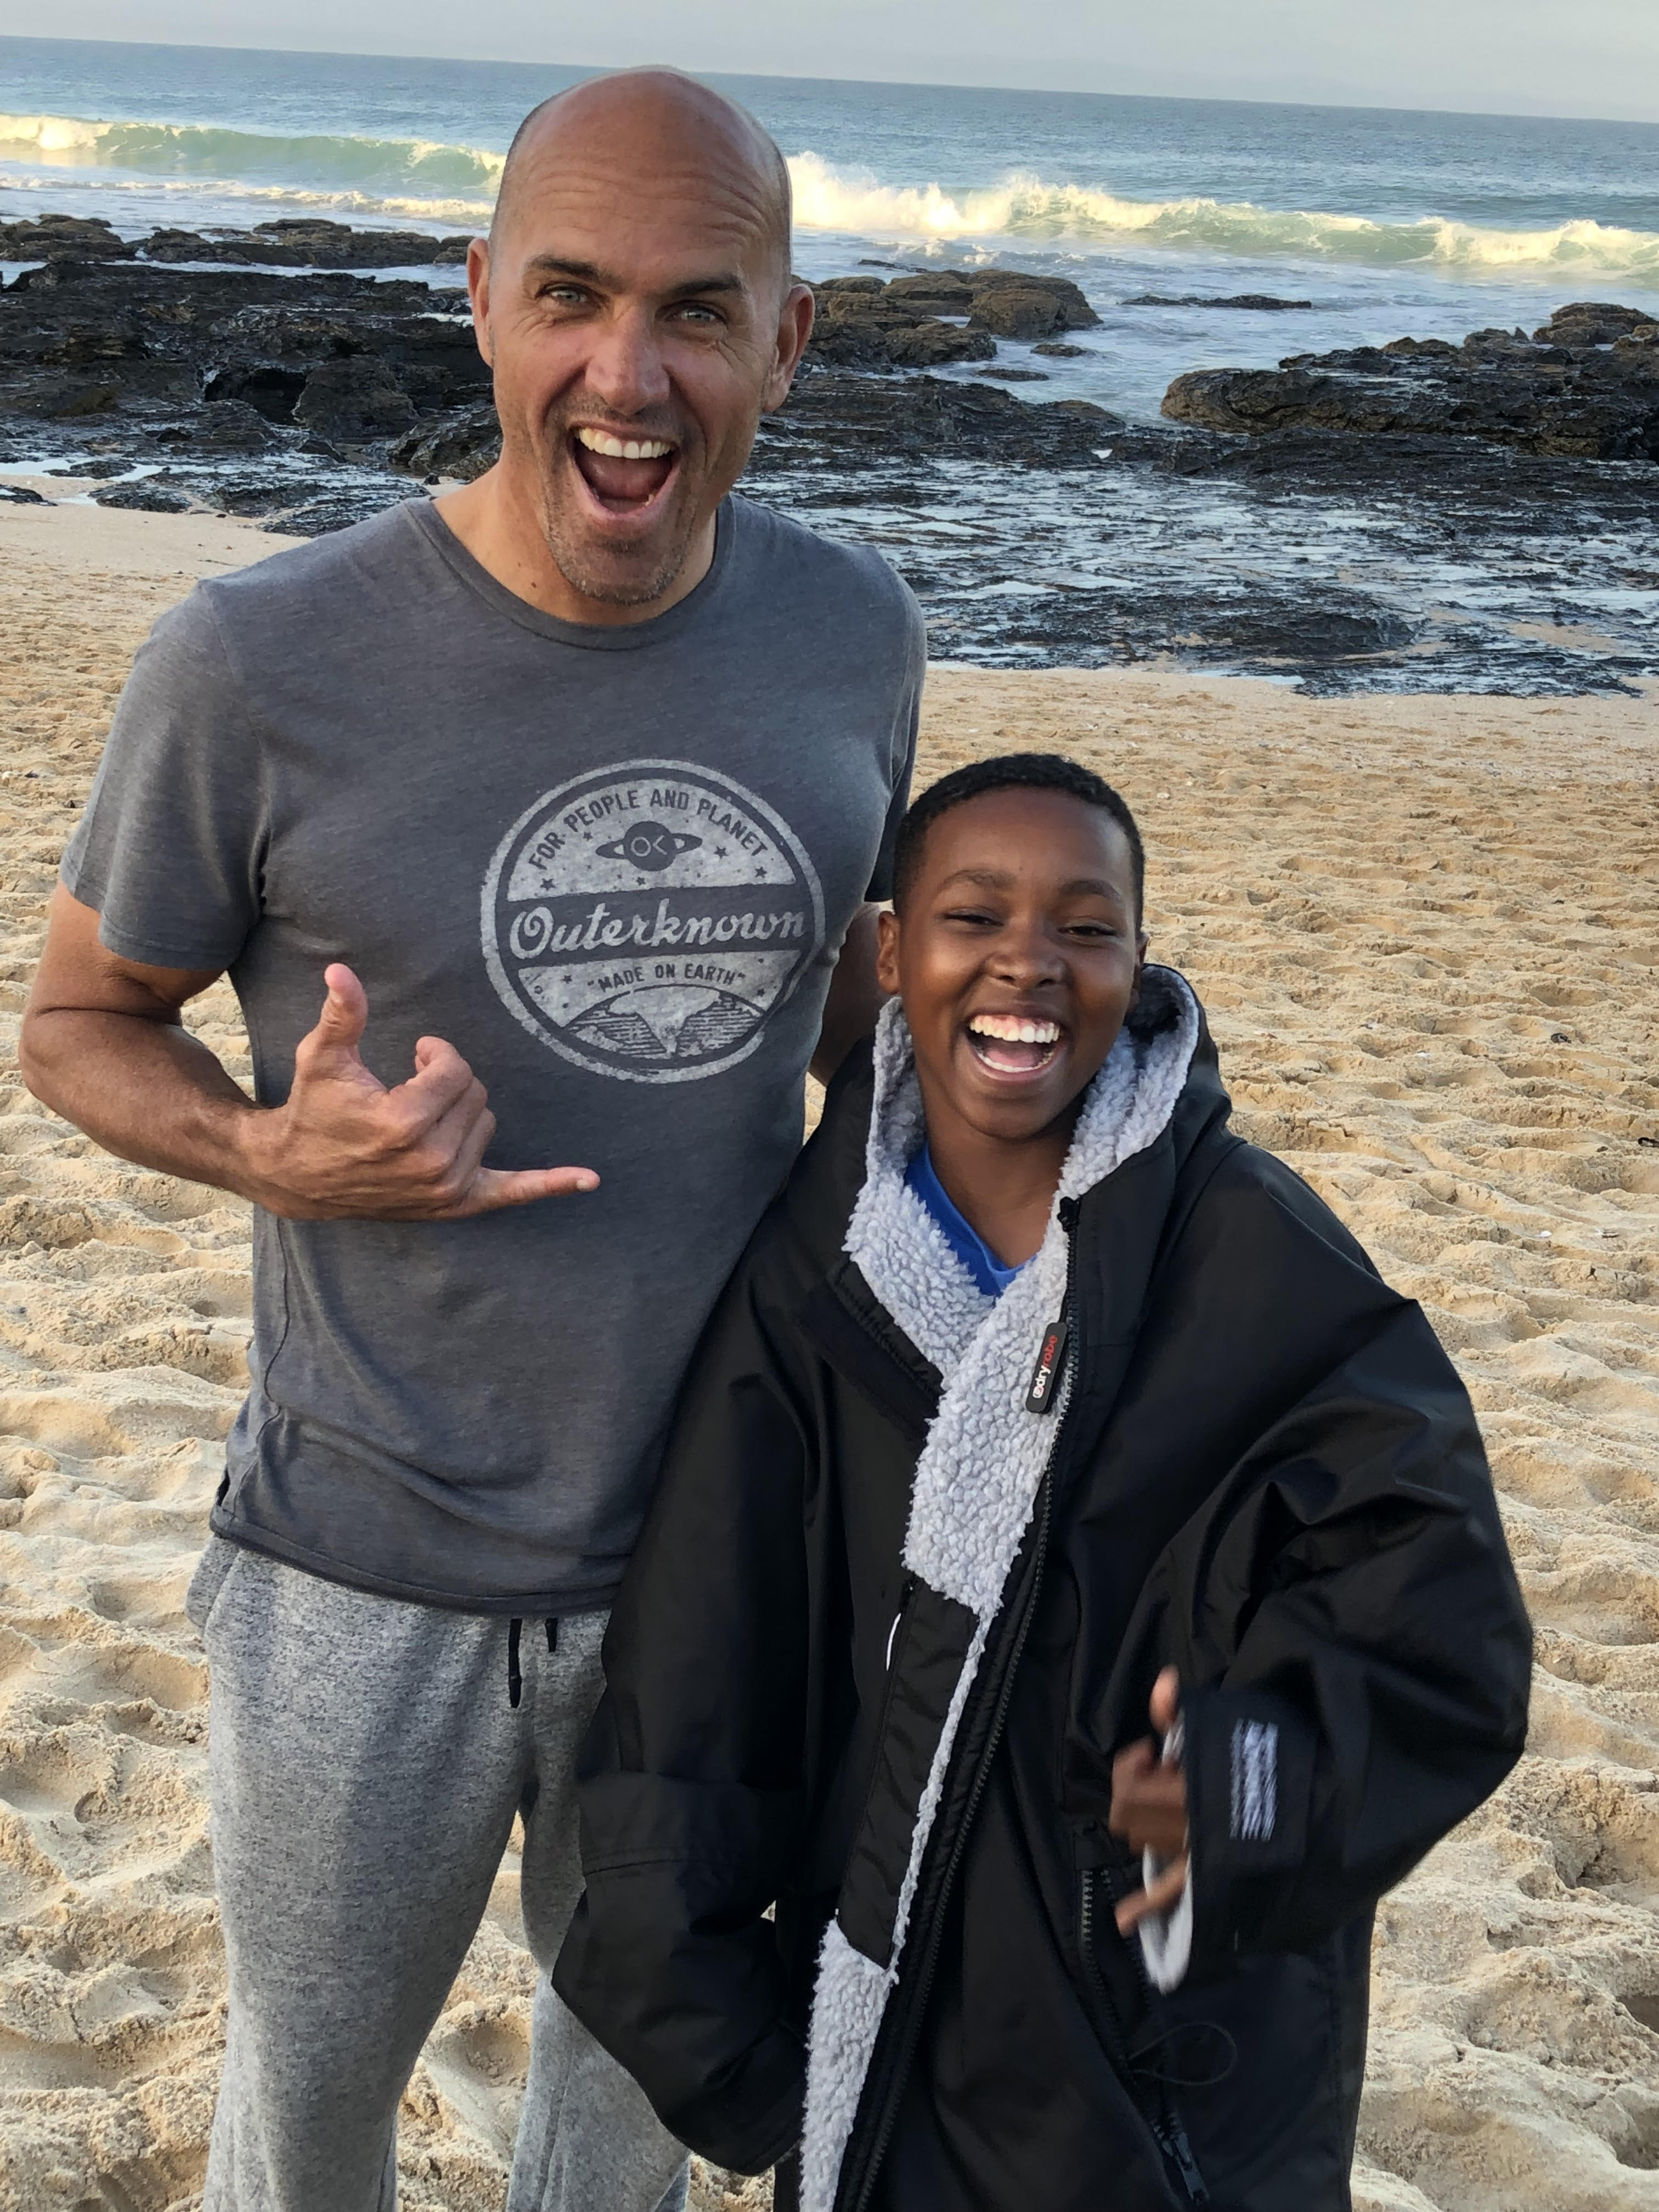 Kelly Slater with Surfers Not Street Children at WSL J-Bay Open 2019